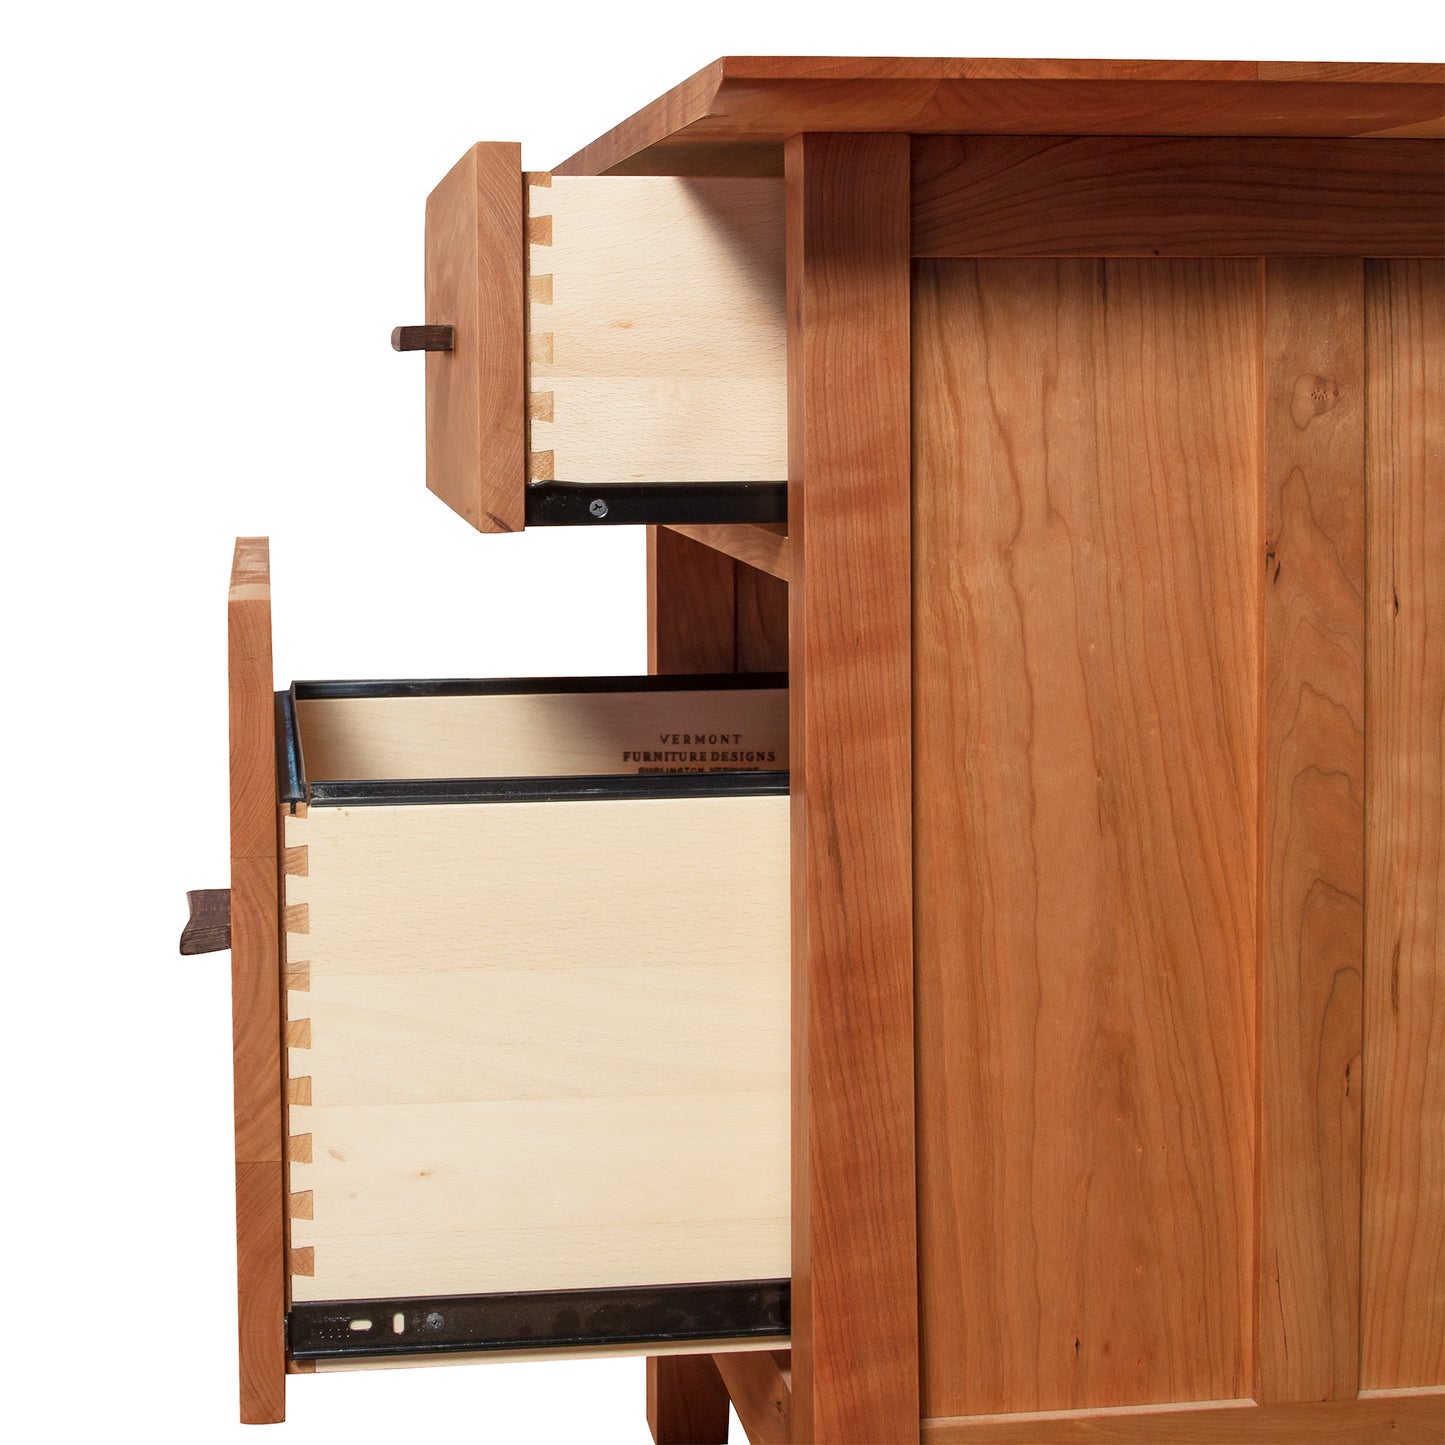 A Contemporary Craftsman Study Desk by Vermont Furniture Designs with two drawers partially open, showcasing dovetail joint construction and eco-friendly finish.